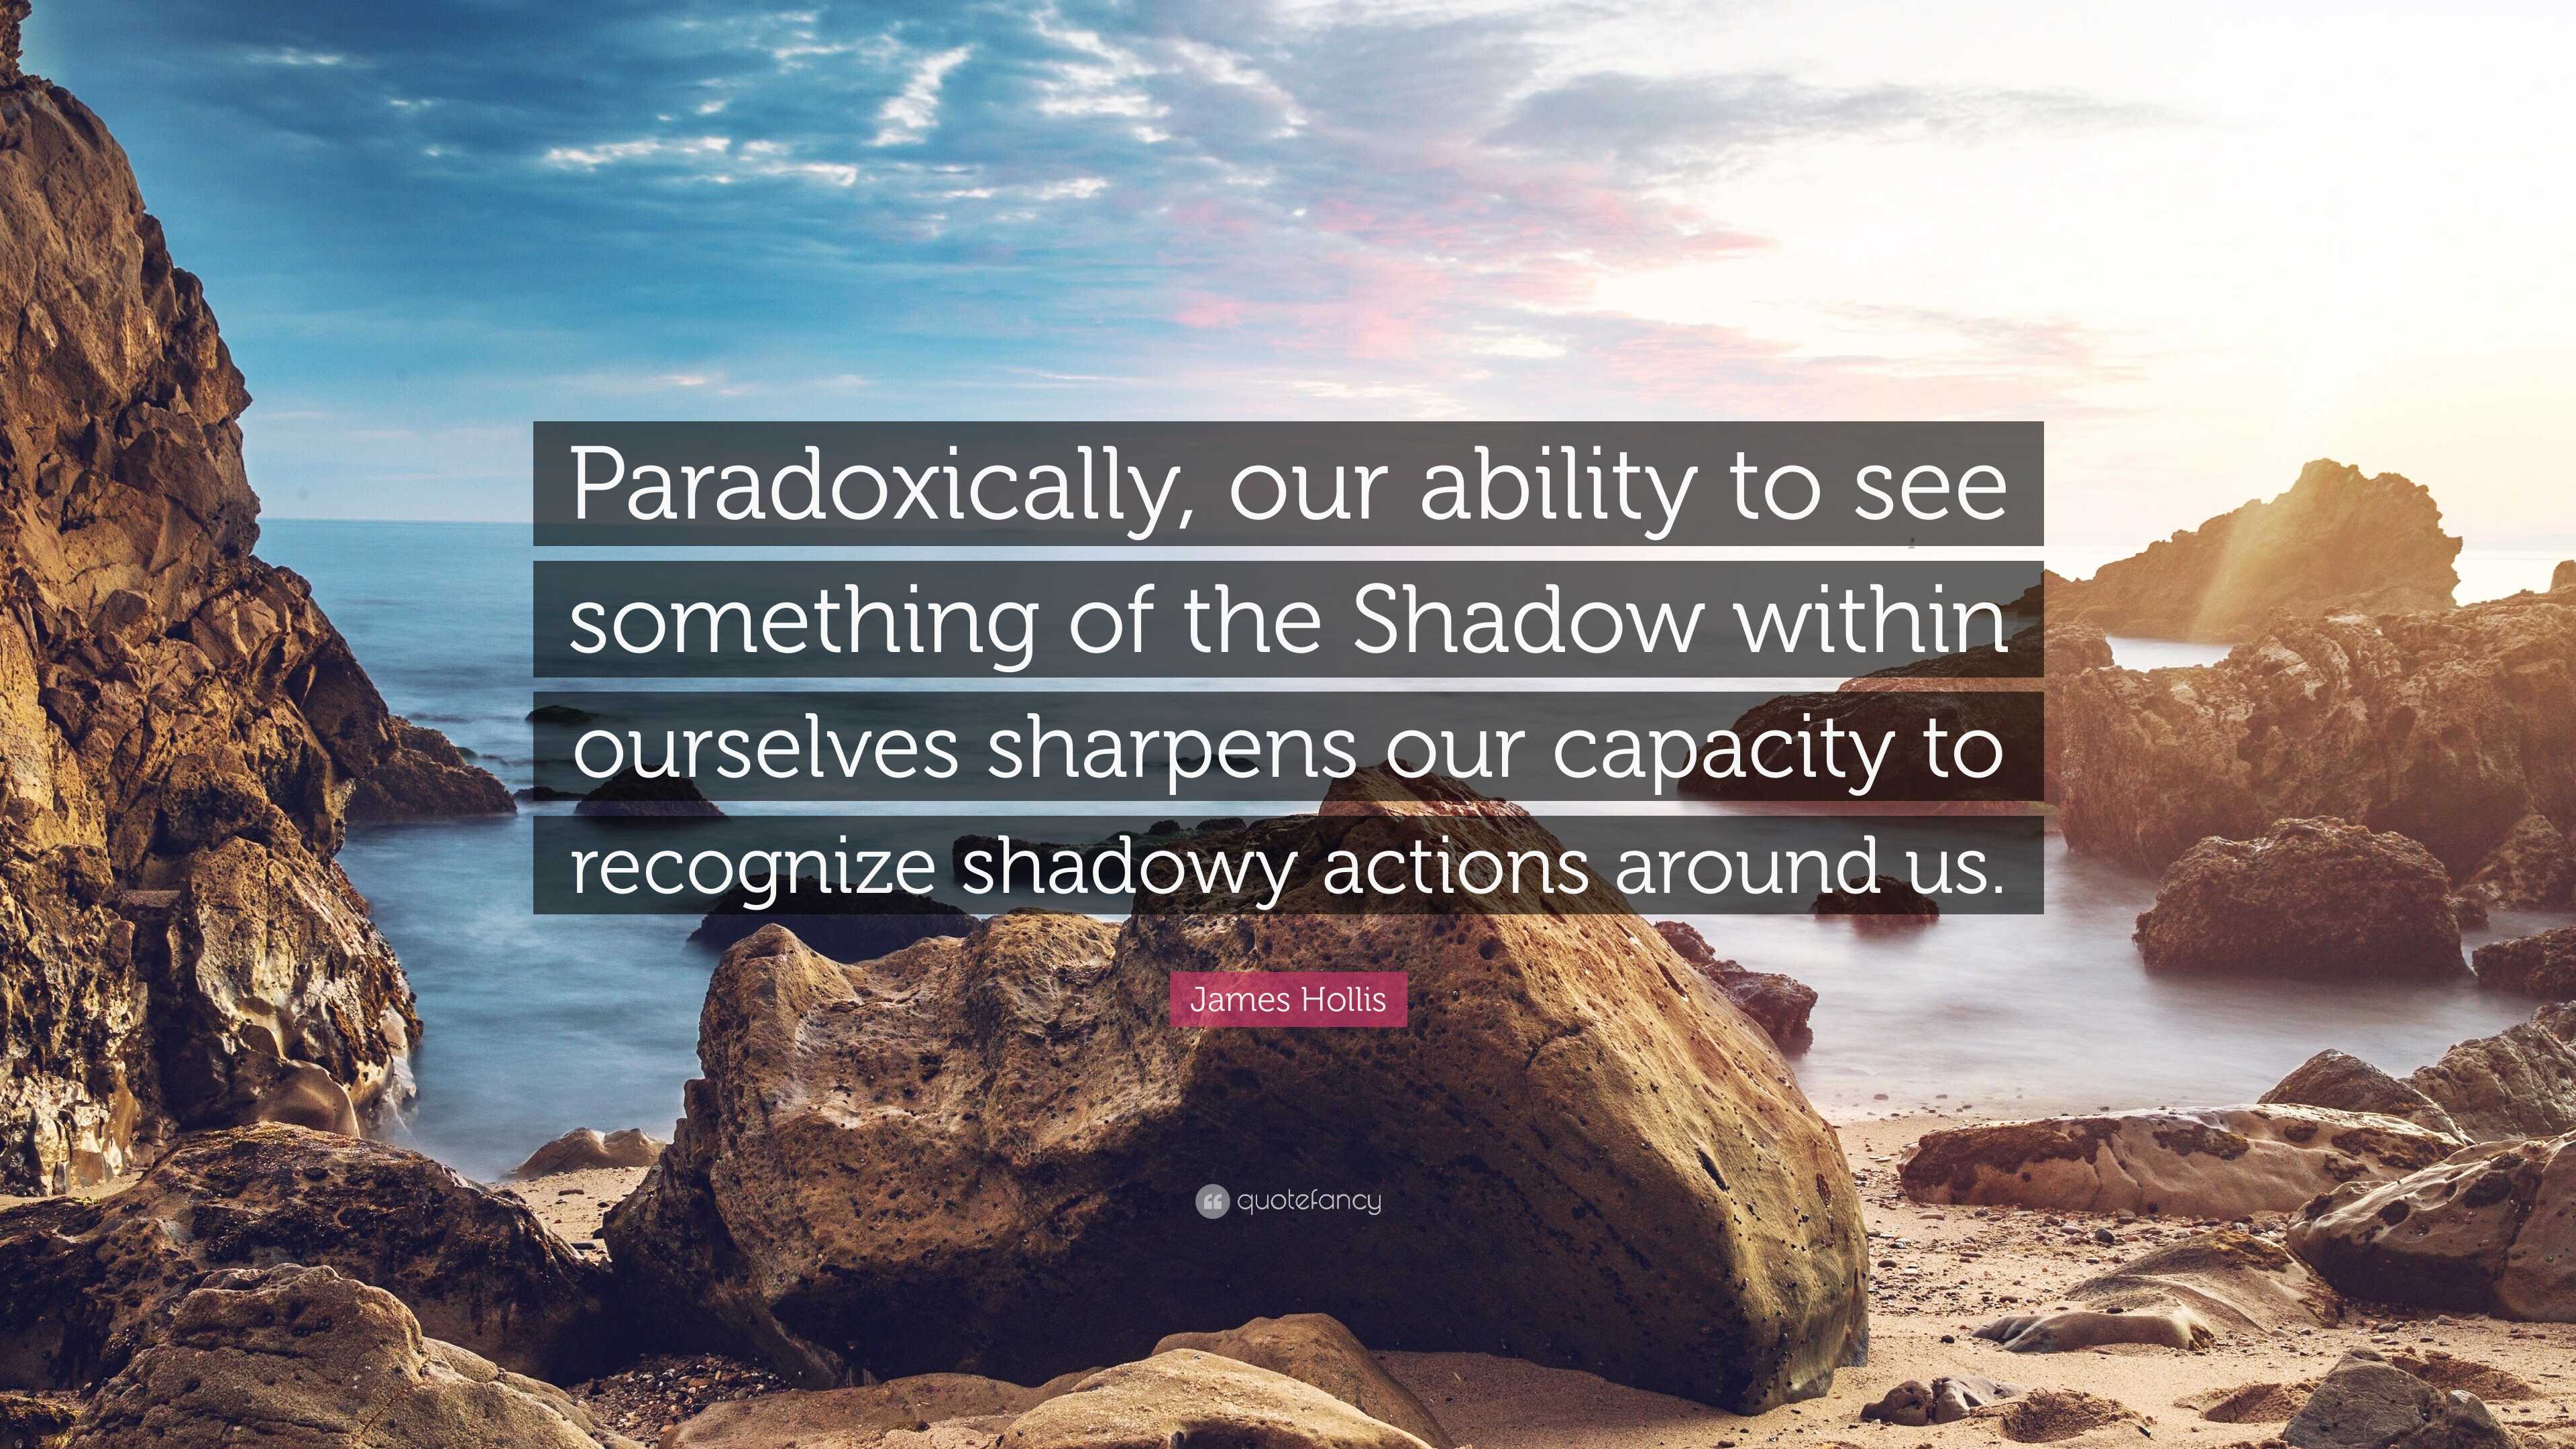 https://quotefancy.com/media/wallpaper/3840x2160/7849452-James-Hollis-Quote-Paradoxically-our-ability-to-see-something-of.jpg